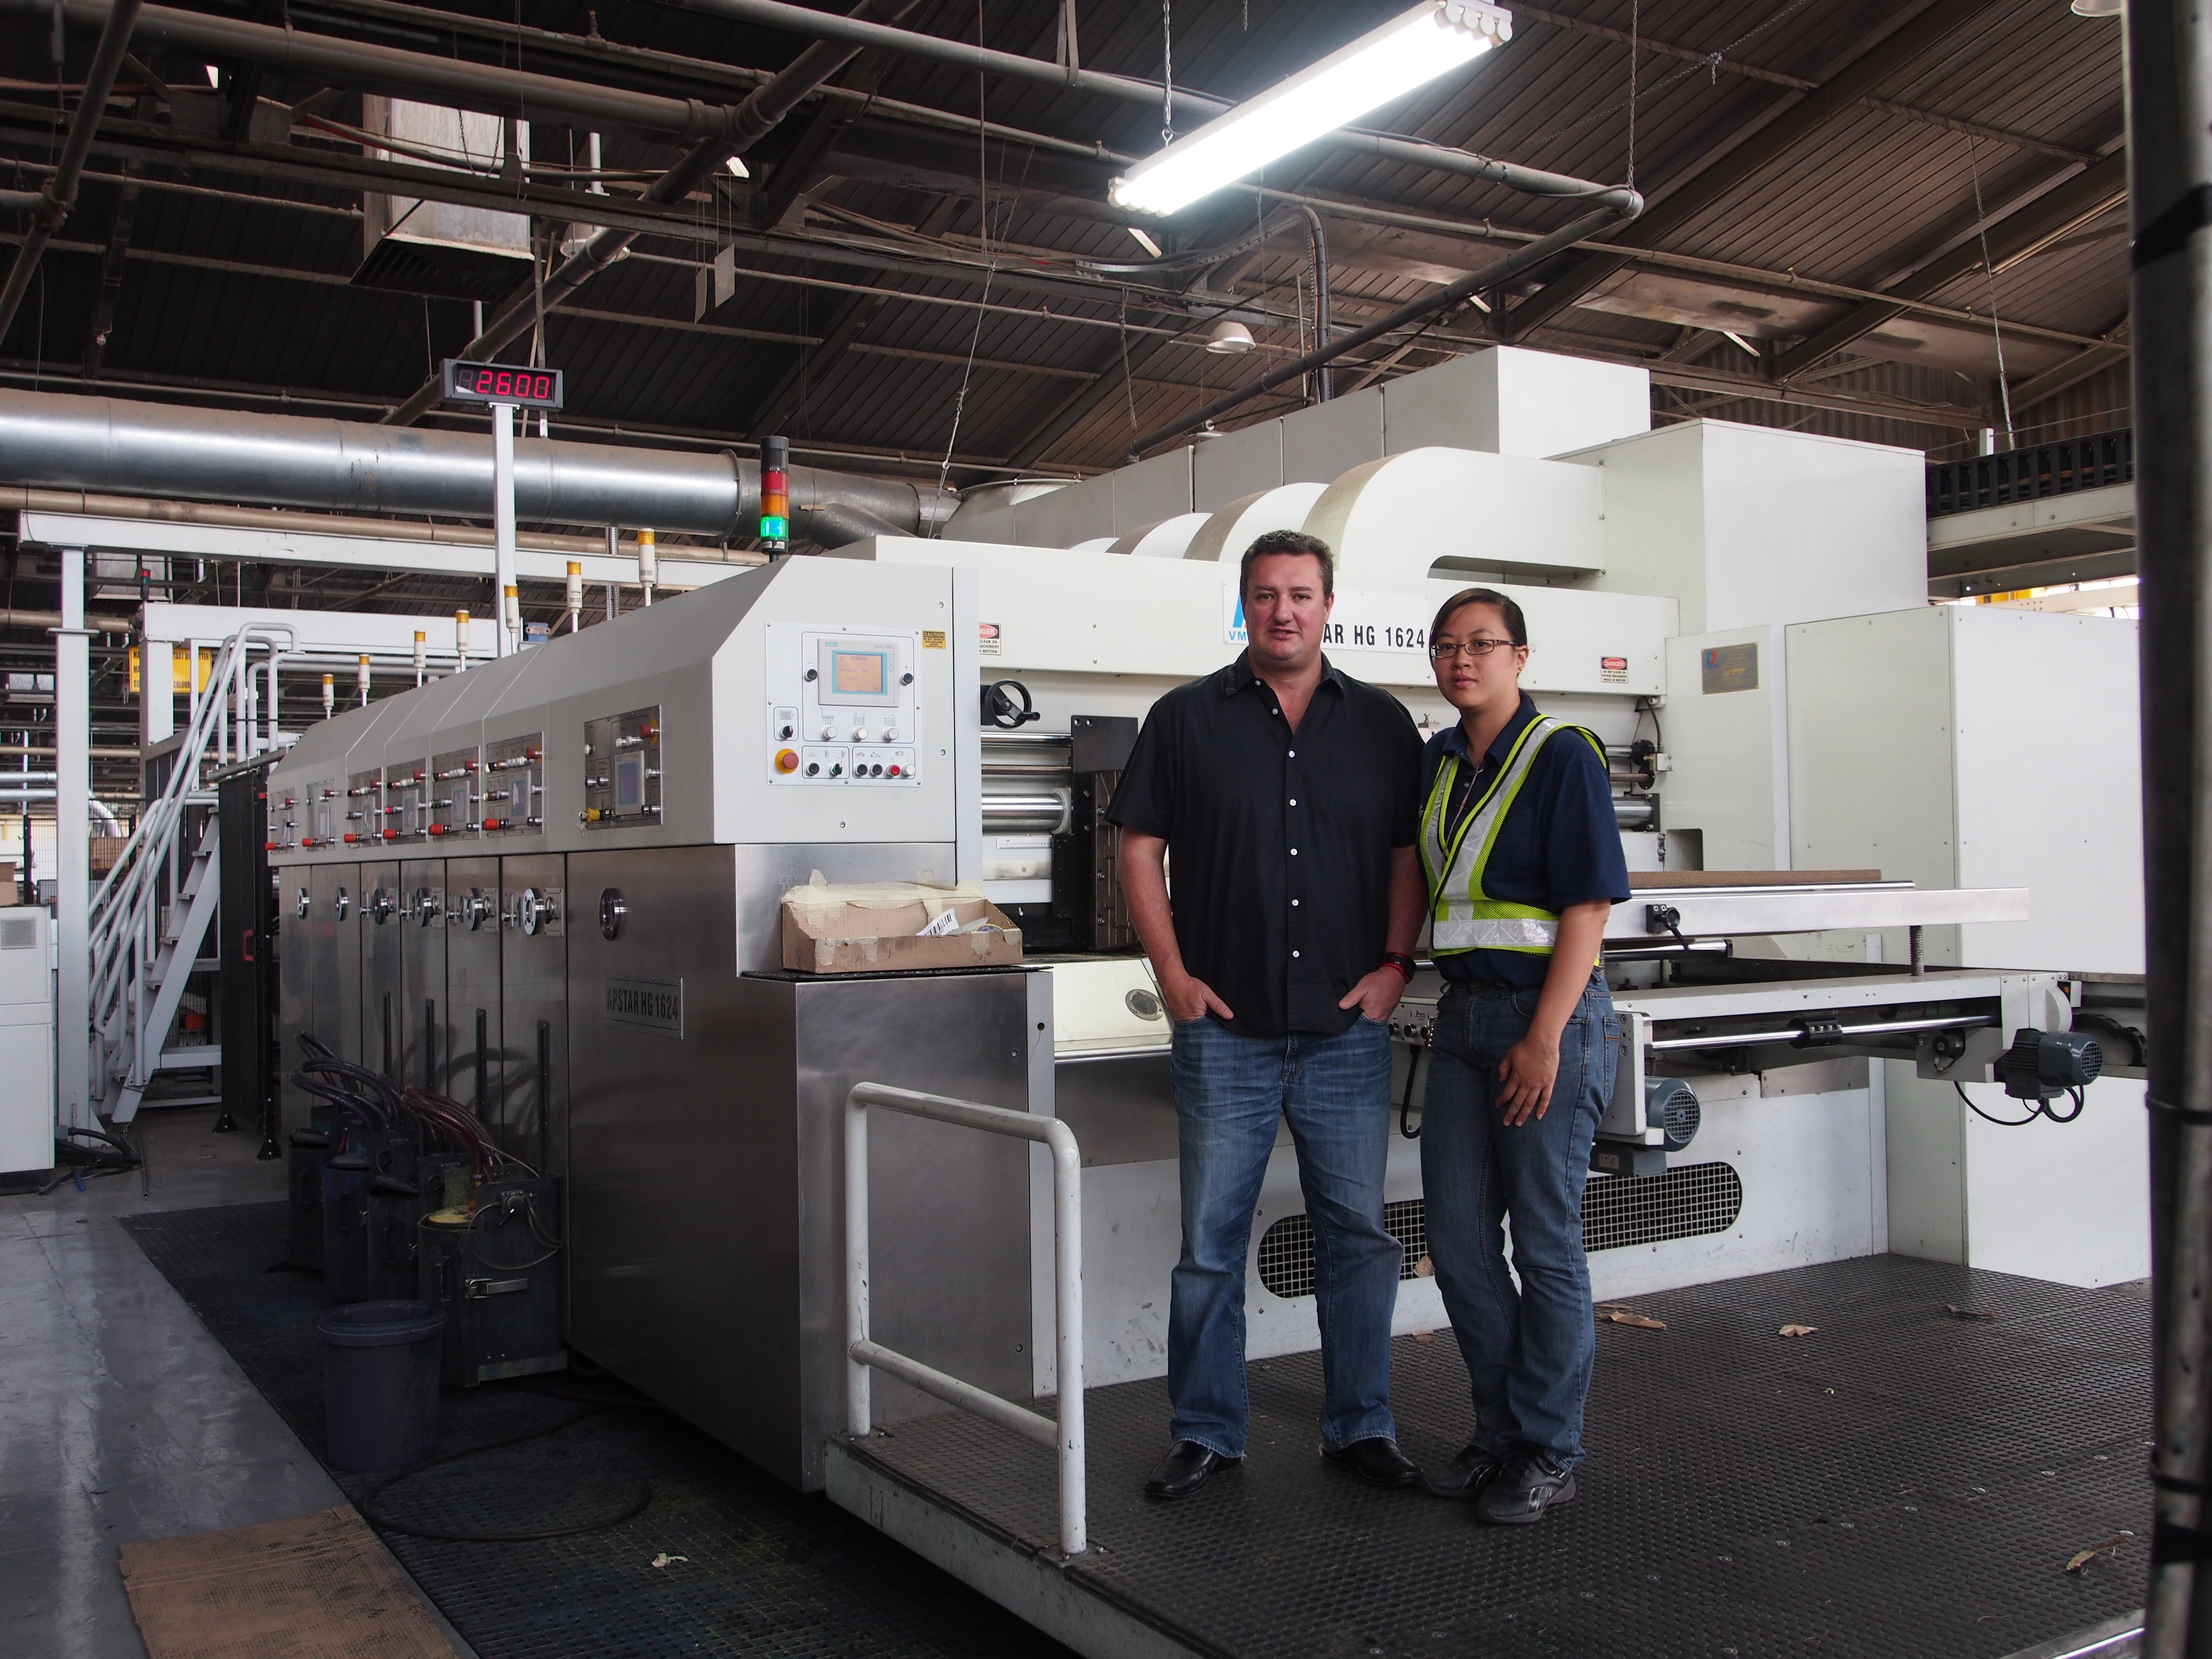 General Manager, Ryan Swan with Goettsch Technician, Jessica Zhang with Box Lee’s New Dong Fang Apstar HG 1624